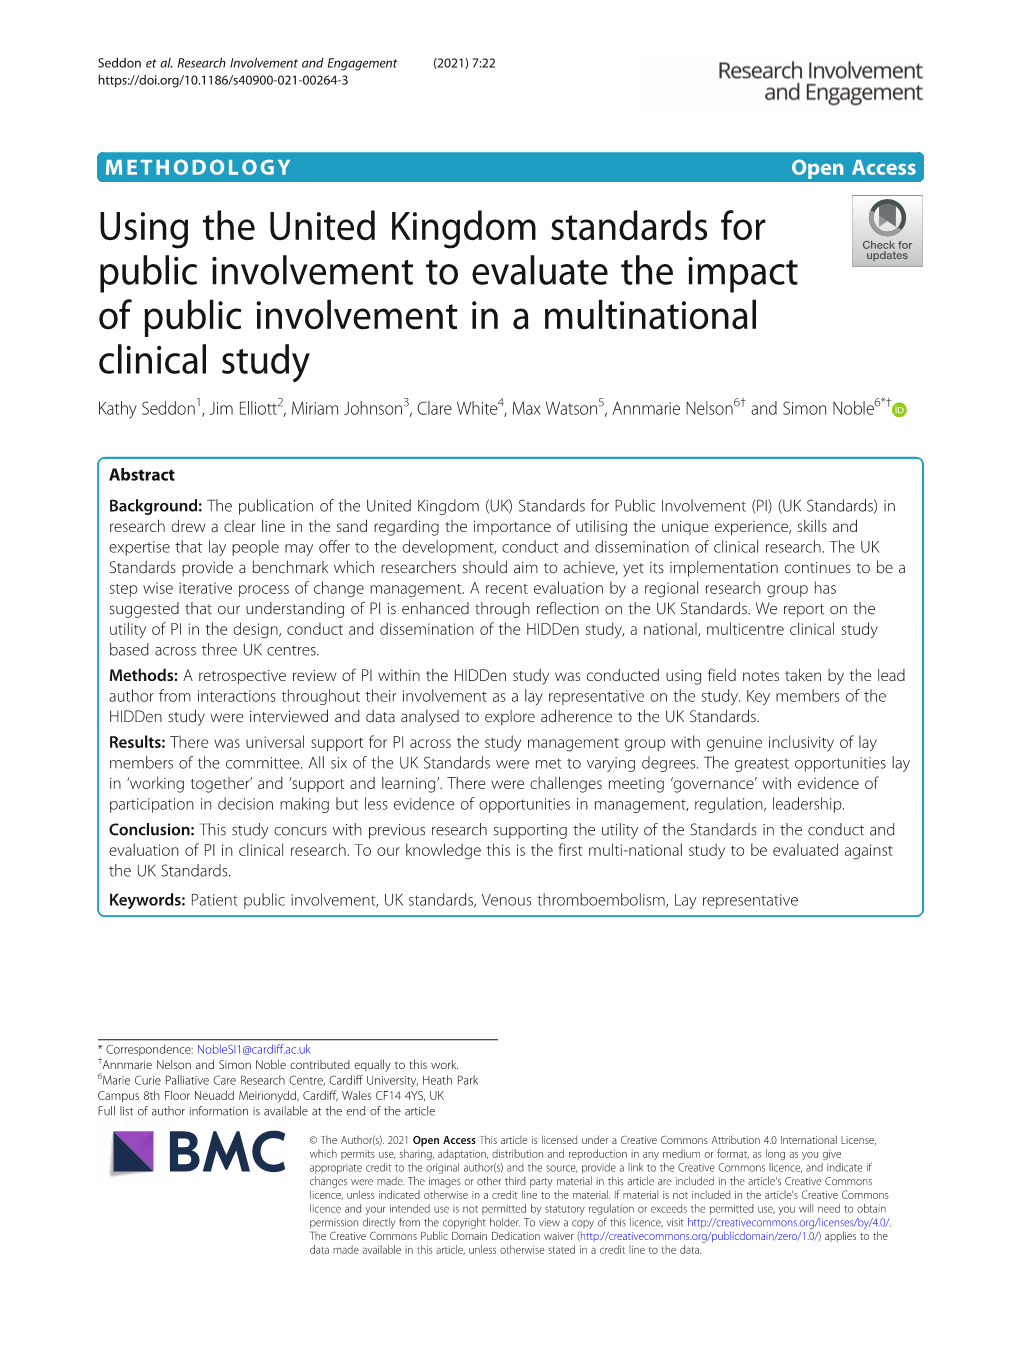 Using the United Kingdom Standards for Public Involvement to Evaluate